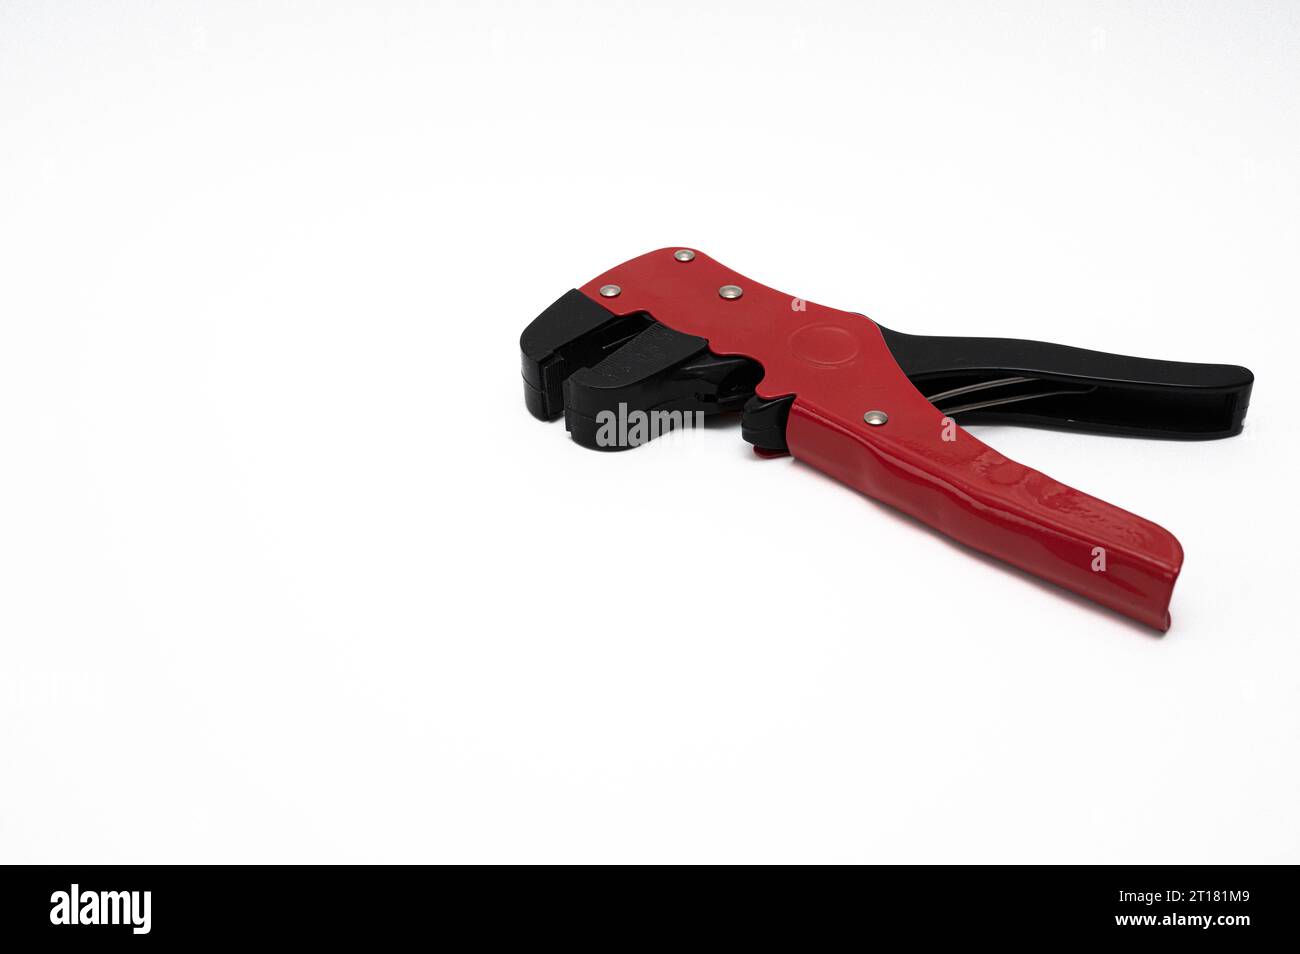 wire stripper with red and black handles isolated on white with copyspace Stock Photo